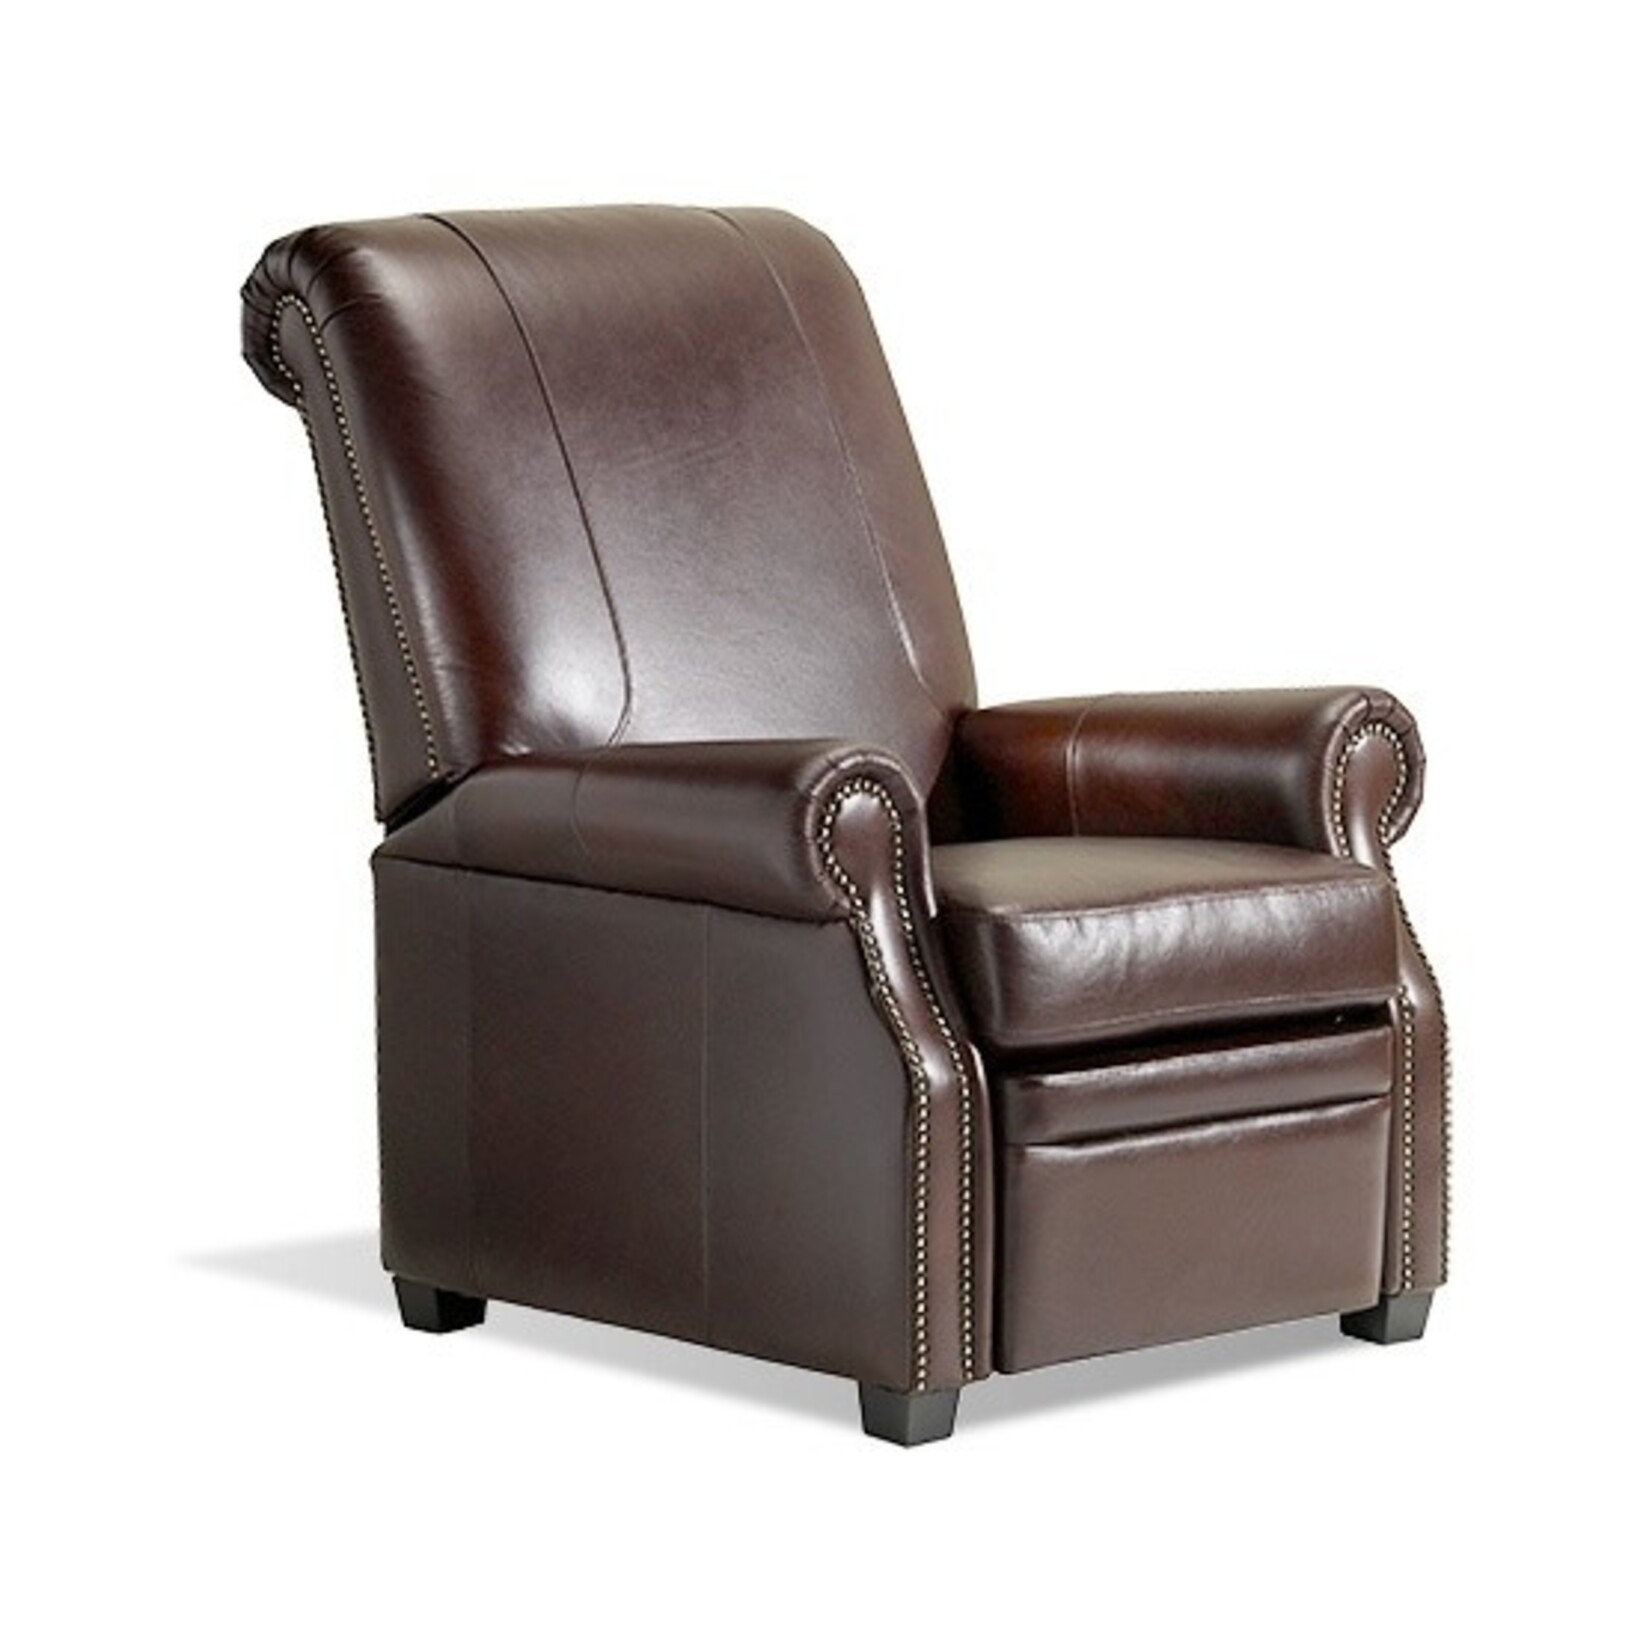 Rama Leather Recliner - Mustang Grey